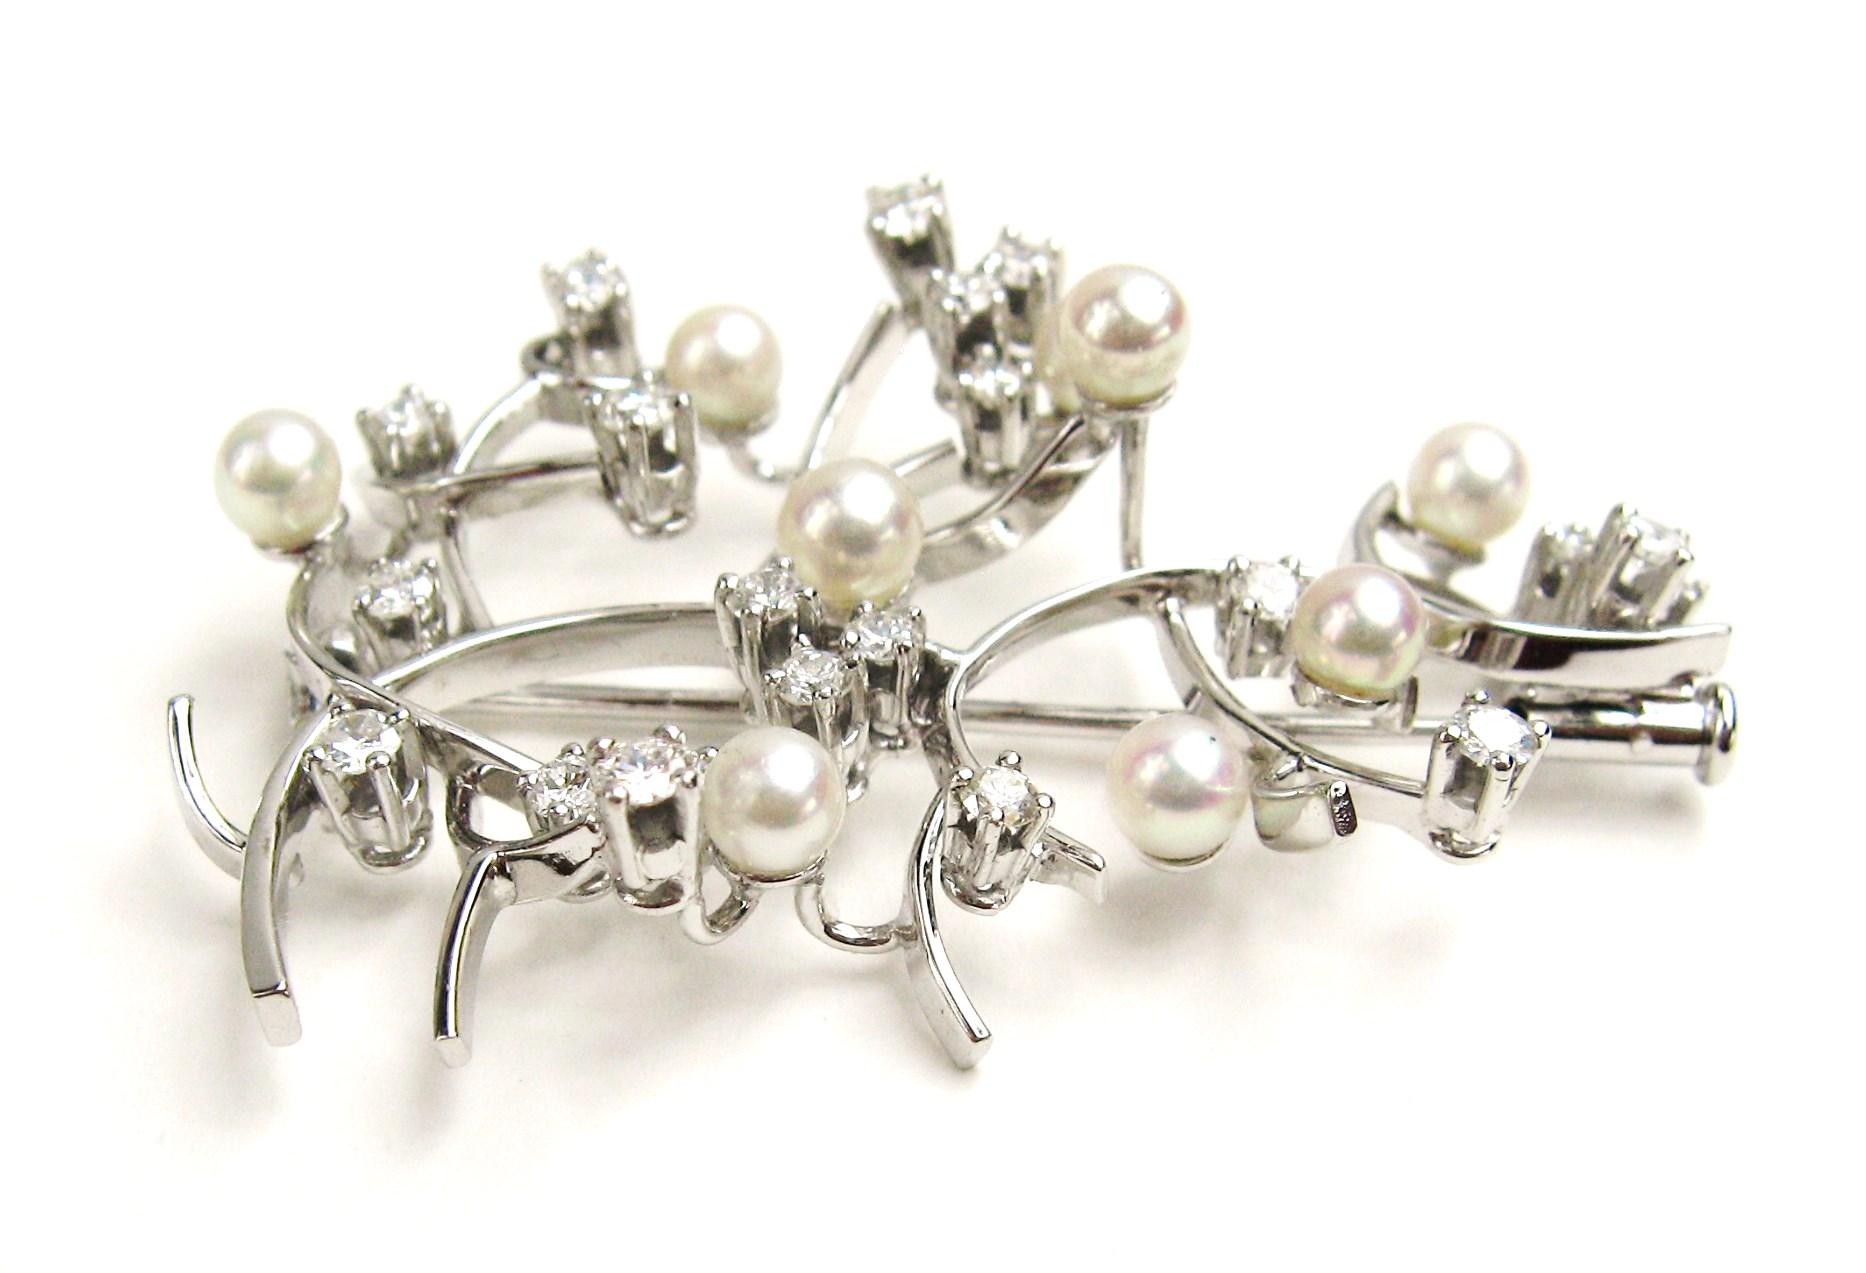 Diamond and Pearl Spray Brooch set in 18K White Gold Hallmarked. Featuring 9 Round Cultured Pearls Measuring 3.7 mm Accented By 23 Round Brilliant Cut Diamonds. Stunning quality prong set diamonds. Be sure to check our store front for more fabulous